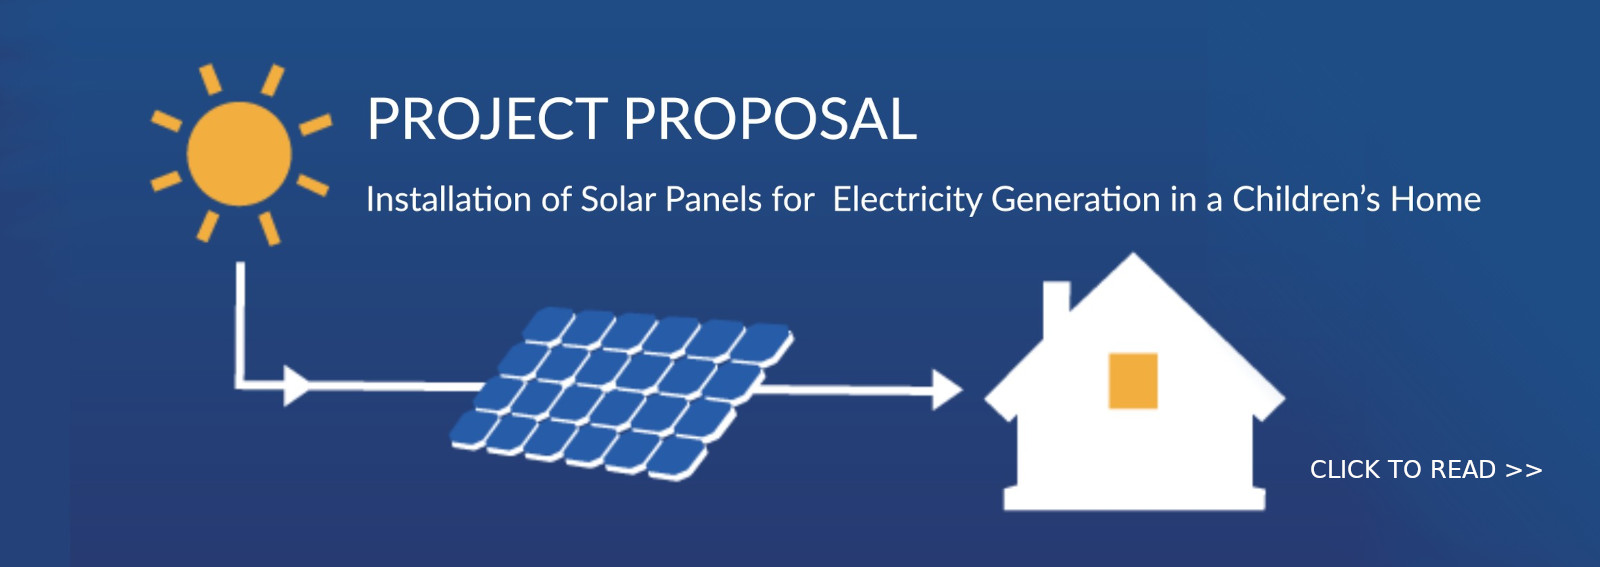 Project Proposal: Installation of Solar Panels for Electricity Generation in a Children’s Home